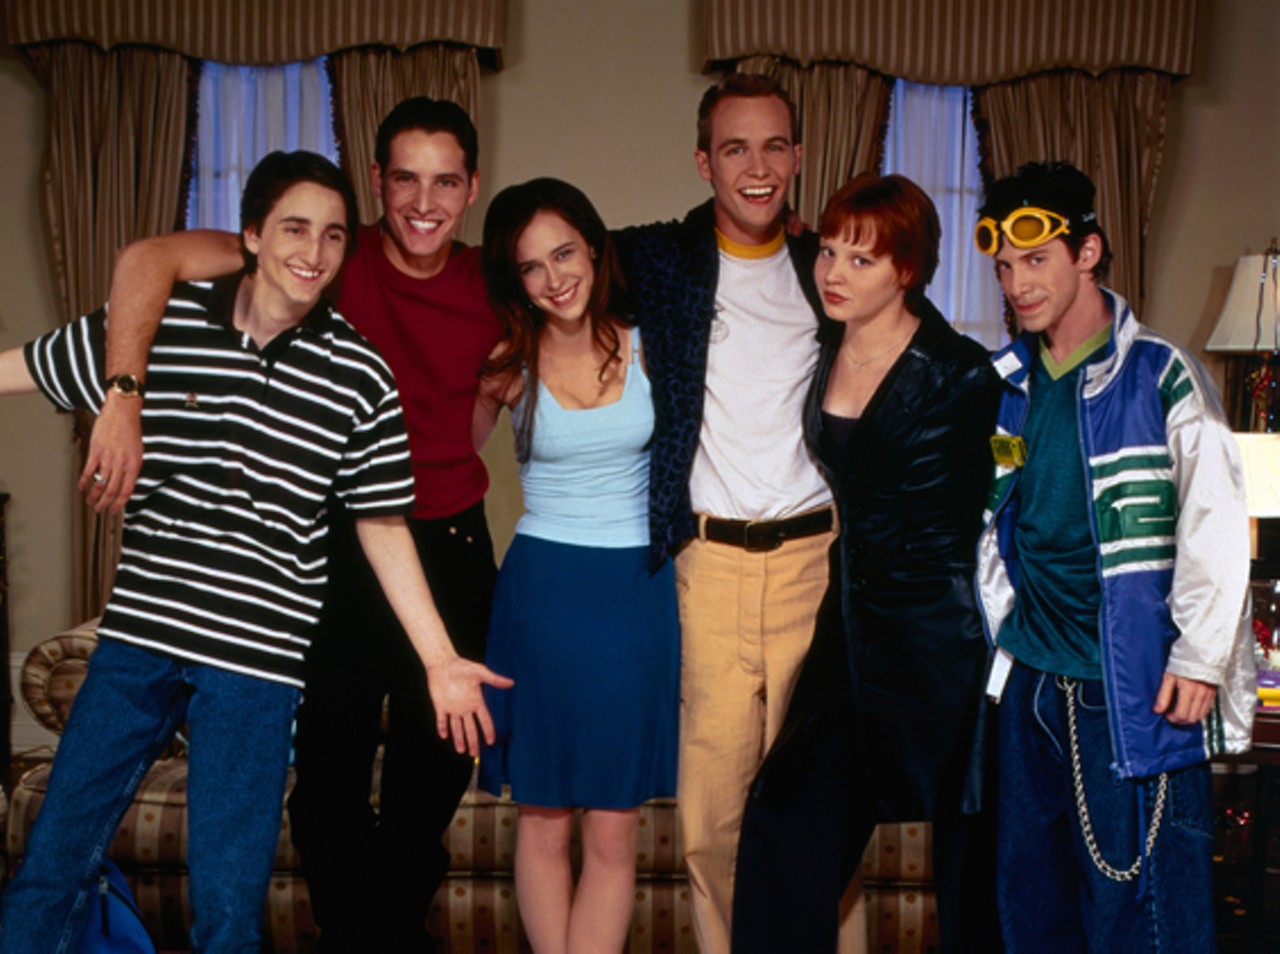 13. Can't Hardly Wait (1998)100 percent of people under thirty immediately cite this as the best party movie ever. Can't Hardly Wait has Jennifer Love Hewitt getting dumped, then falling for the unorthodox nerd, which is awesome for the rest of us as viewers. It should be noted that the film has one of the most memorable epilogue scenes -- a staple of any good party or coming-of-age movie.&nbsp;